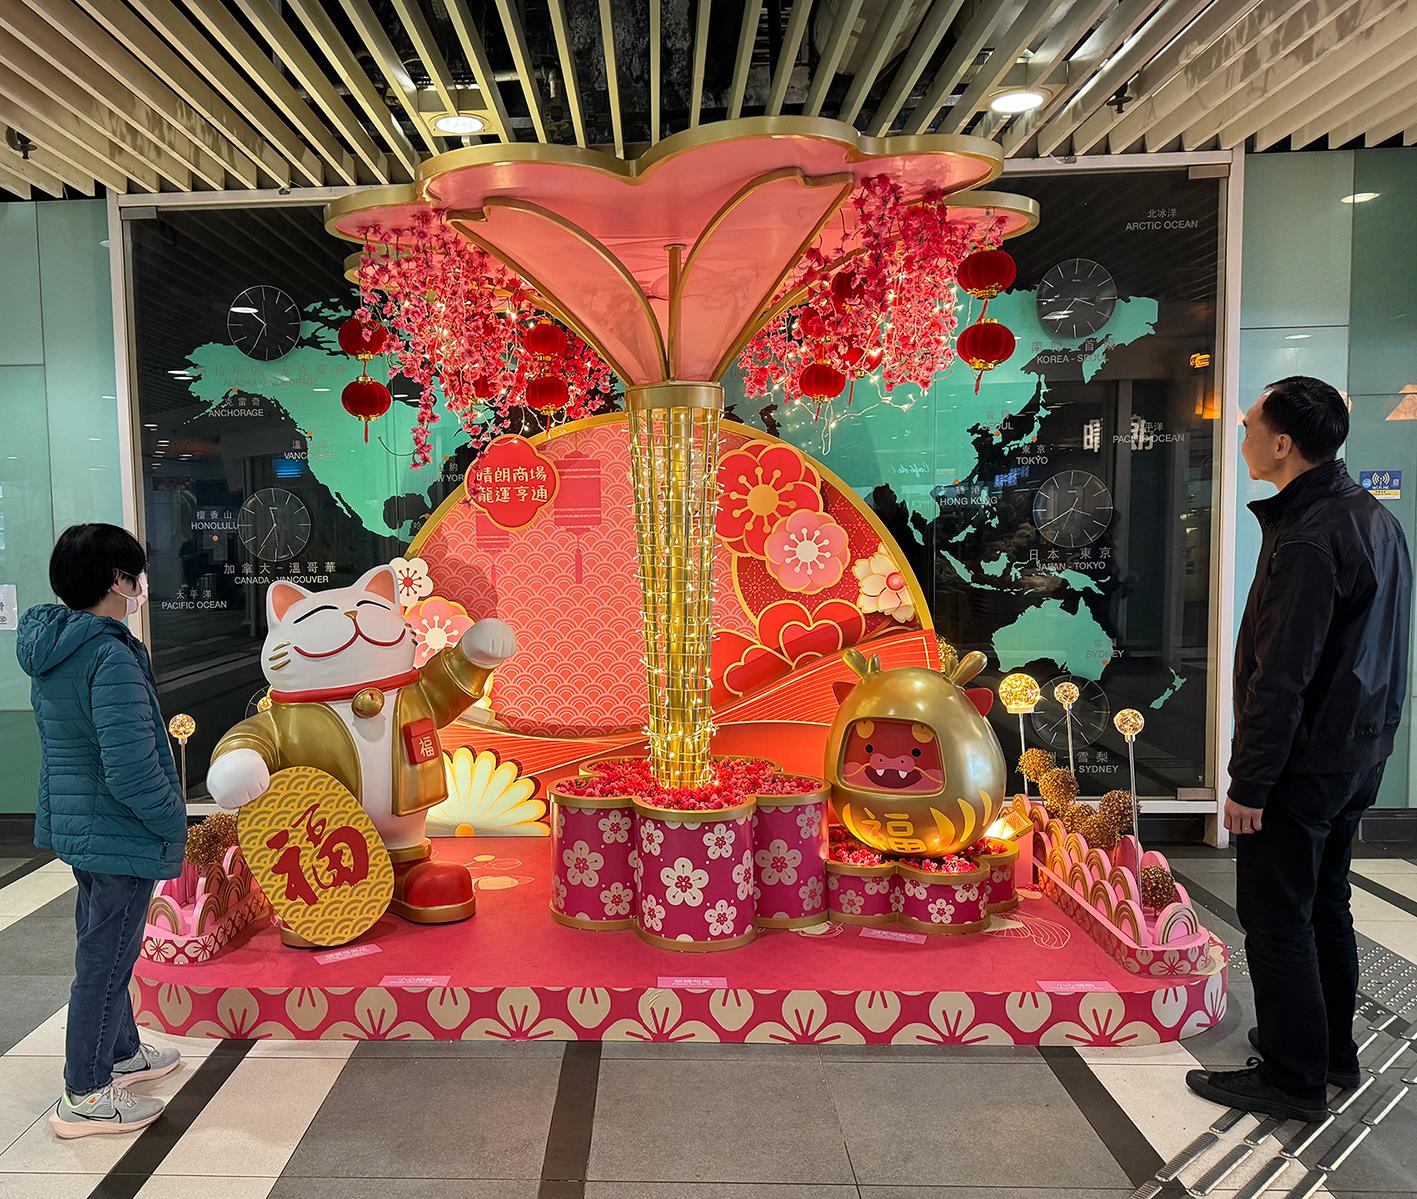 To welcome the Year of the Dragon, the Hong Kong Housing Authority has arranged celebratory events for shoppers to celebrate the new year and help boost the economy. Photo shows the festive New Year decorations at the Ching Long Shopping Centre in Kai Tak.